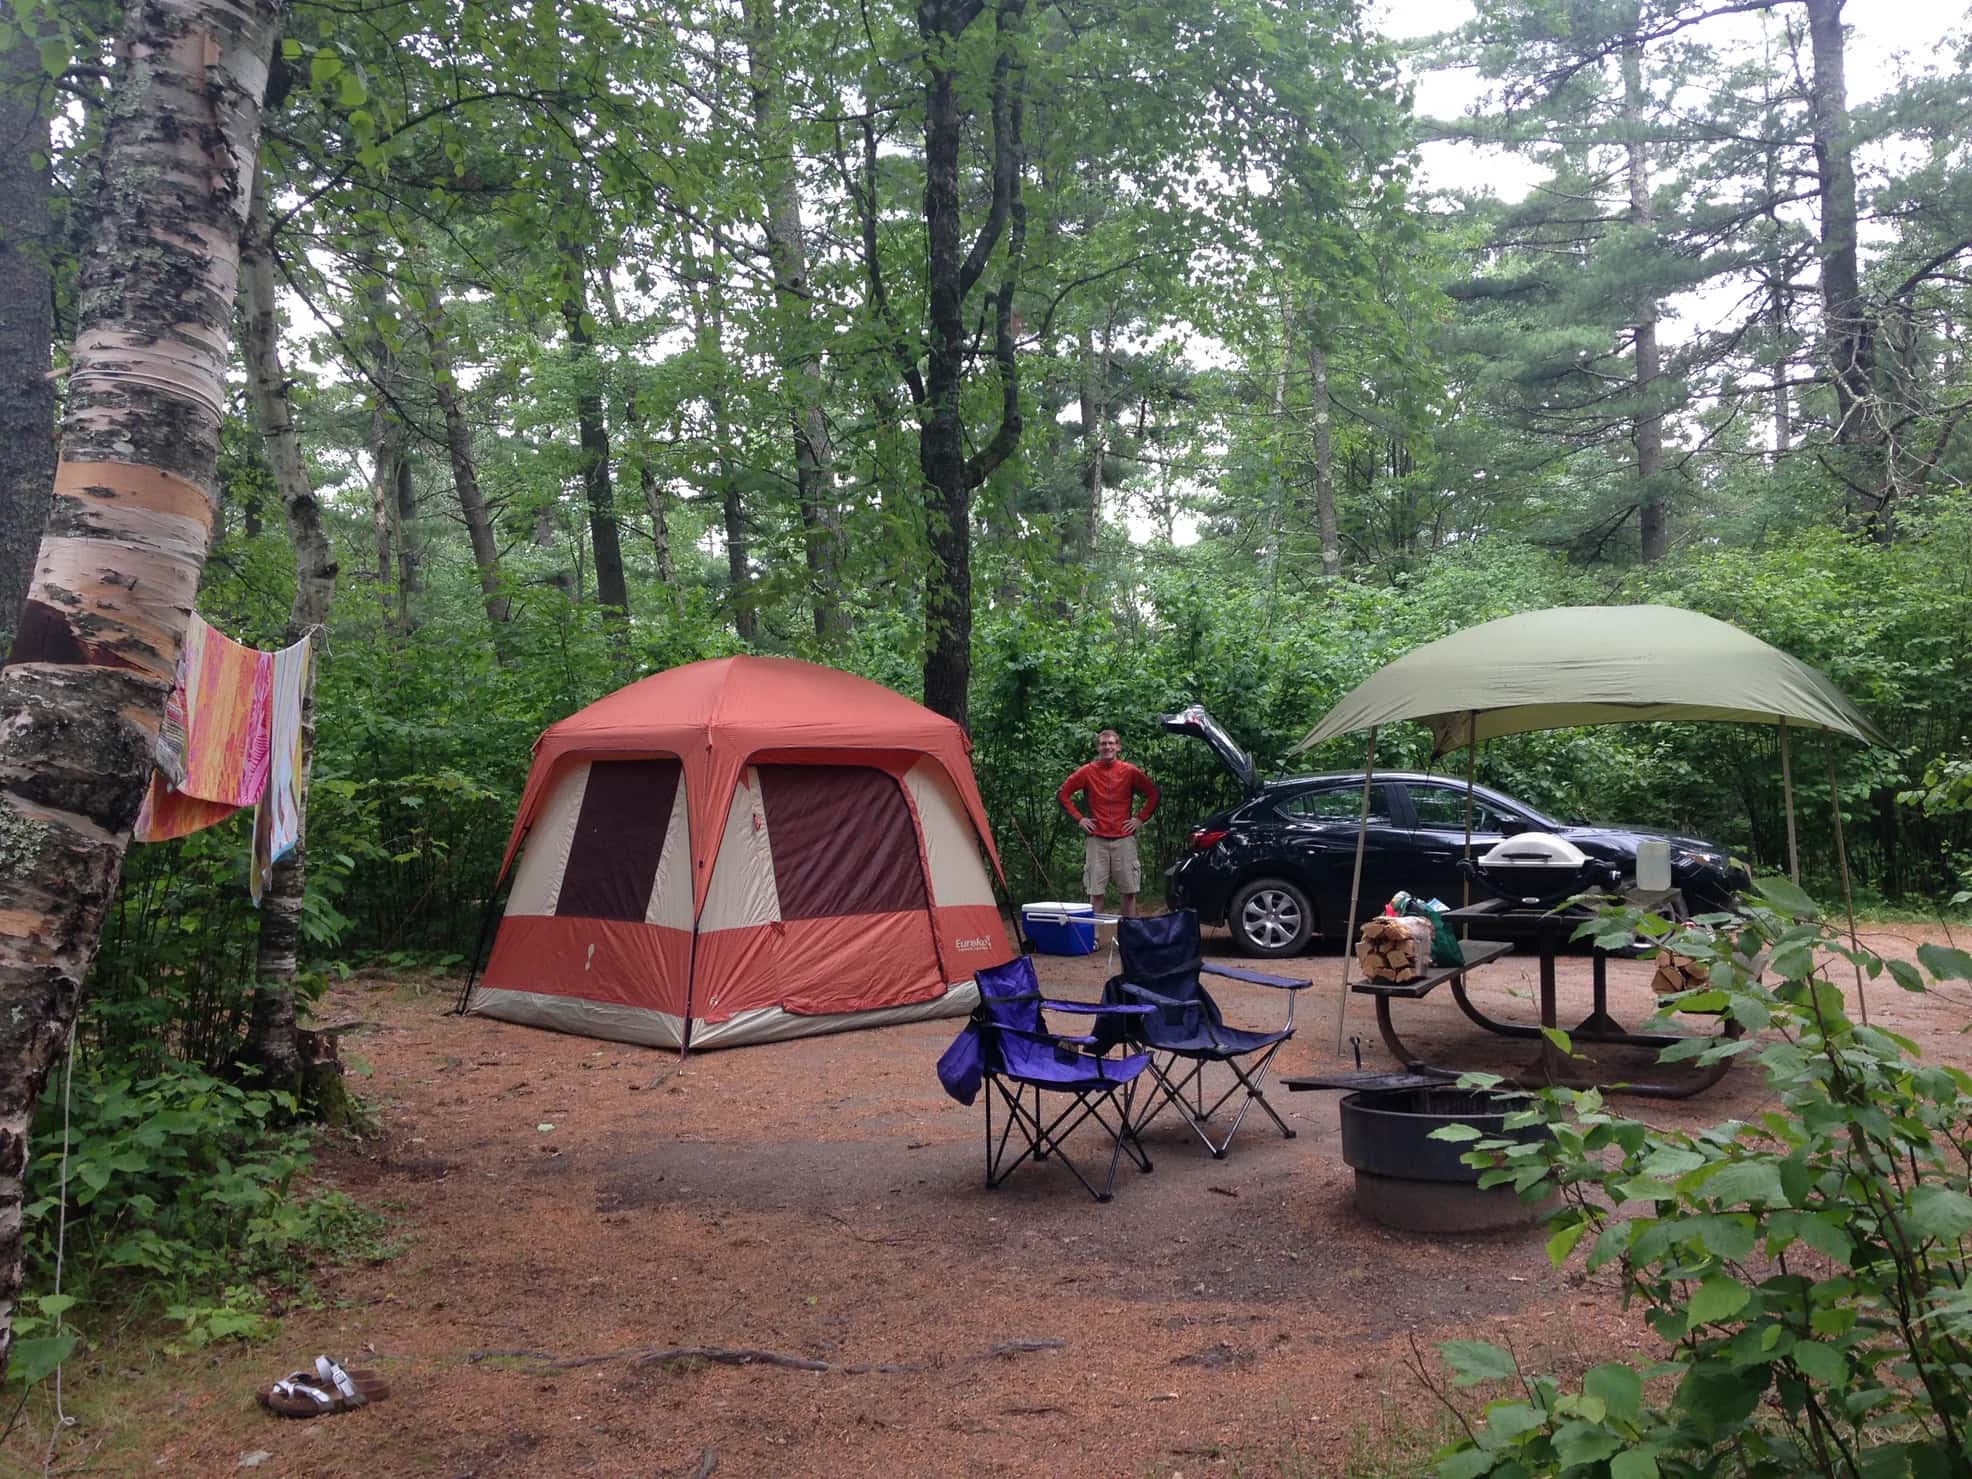 Campsite with red tent, awning, chairs and picnic table in a forested site.